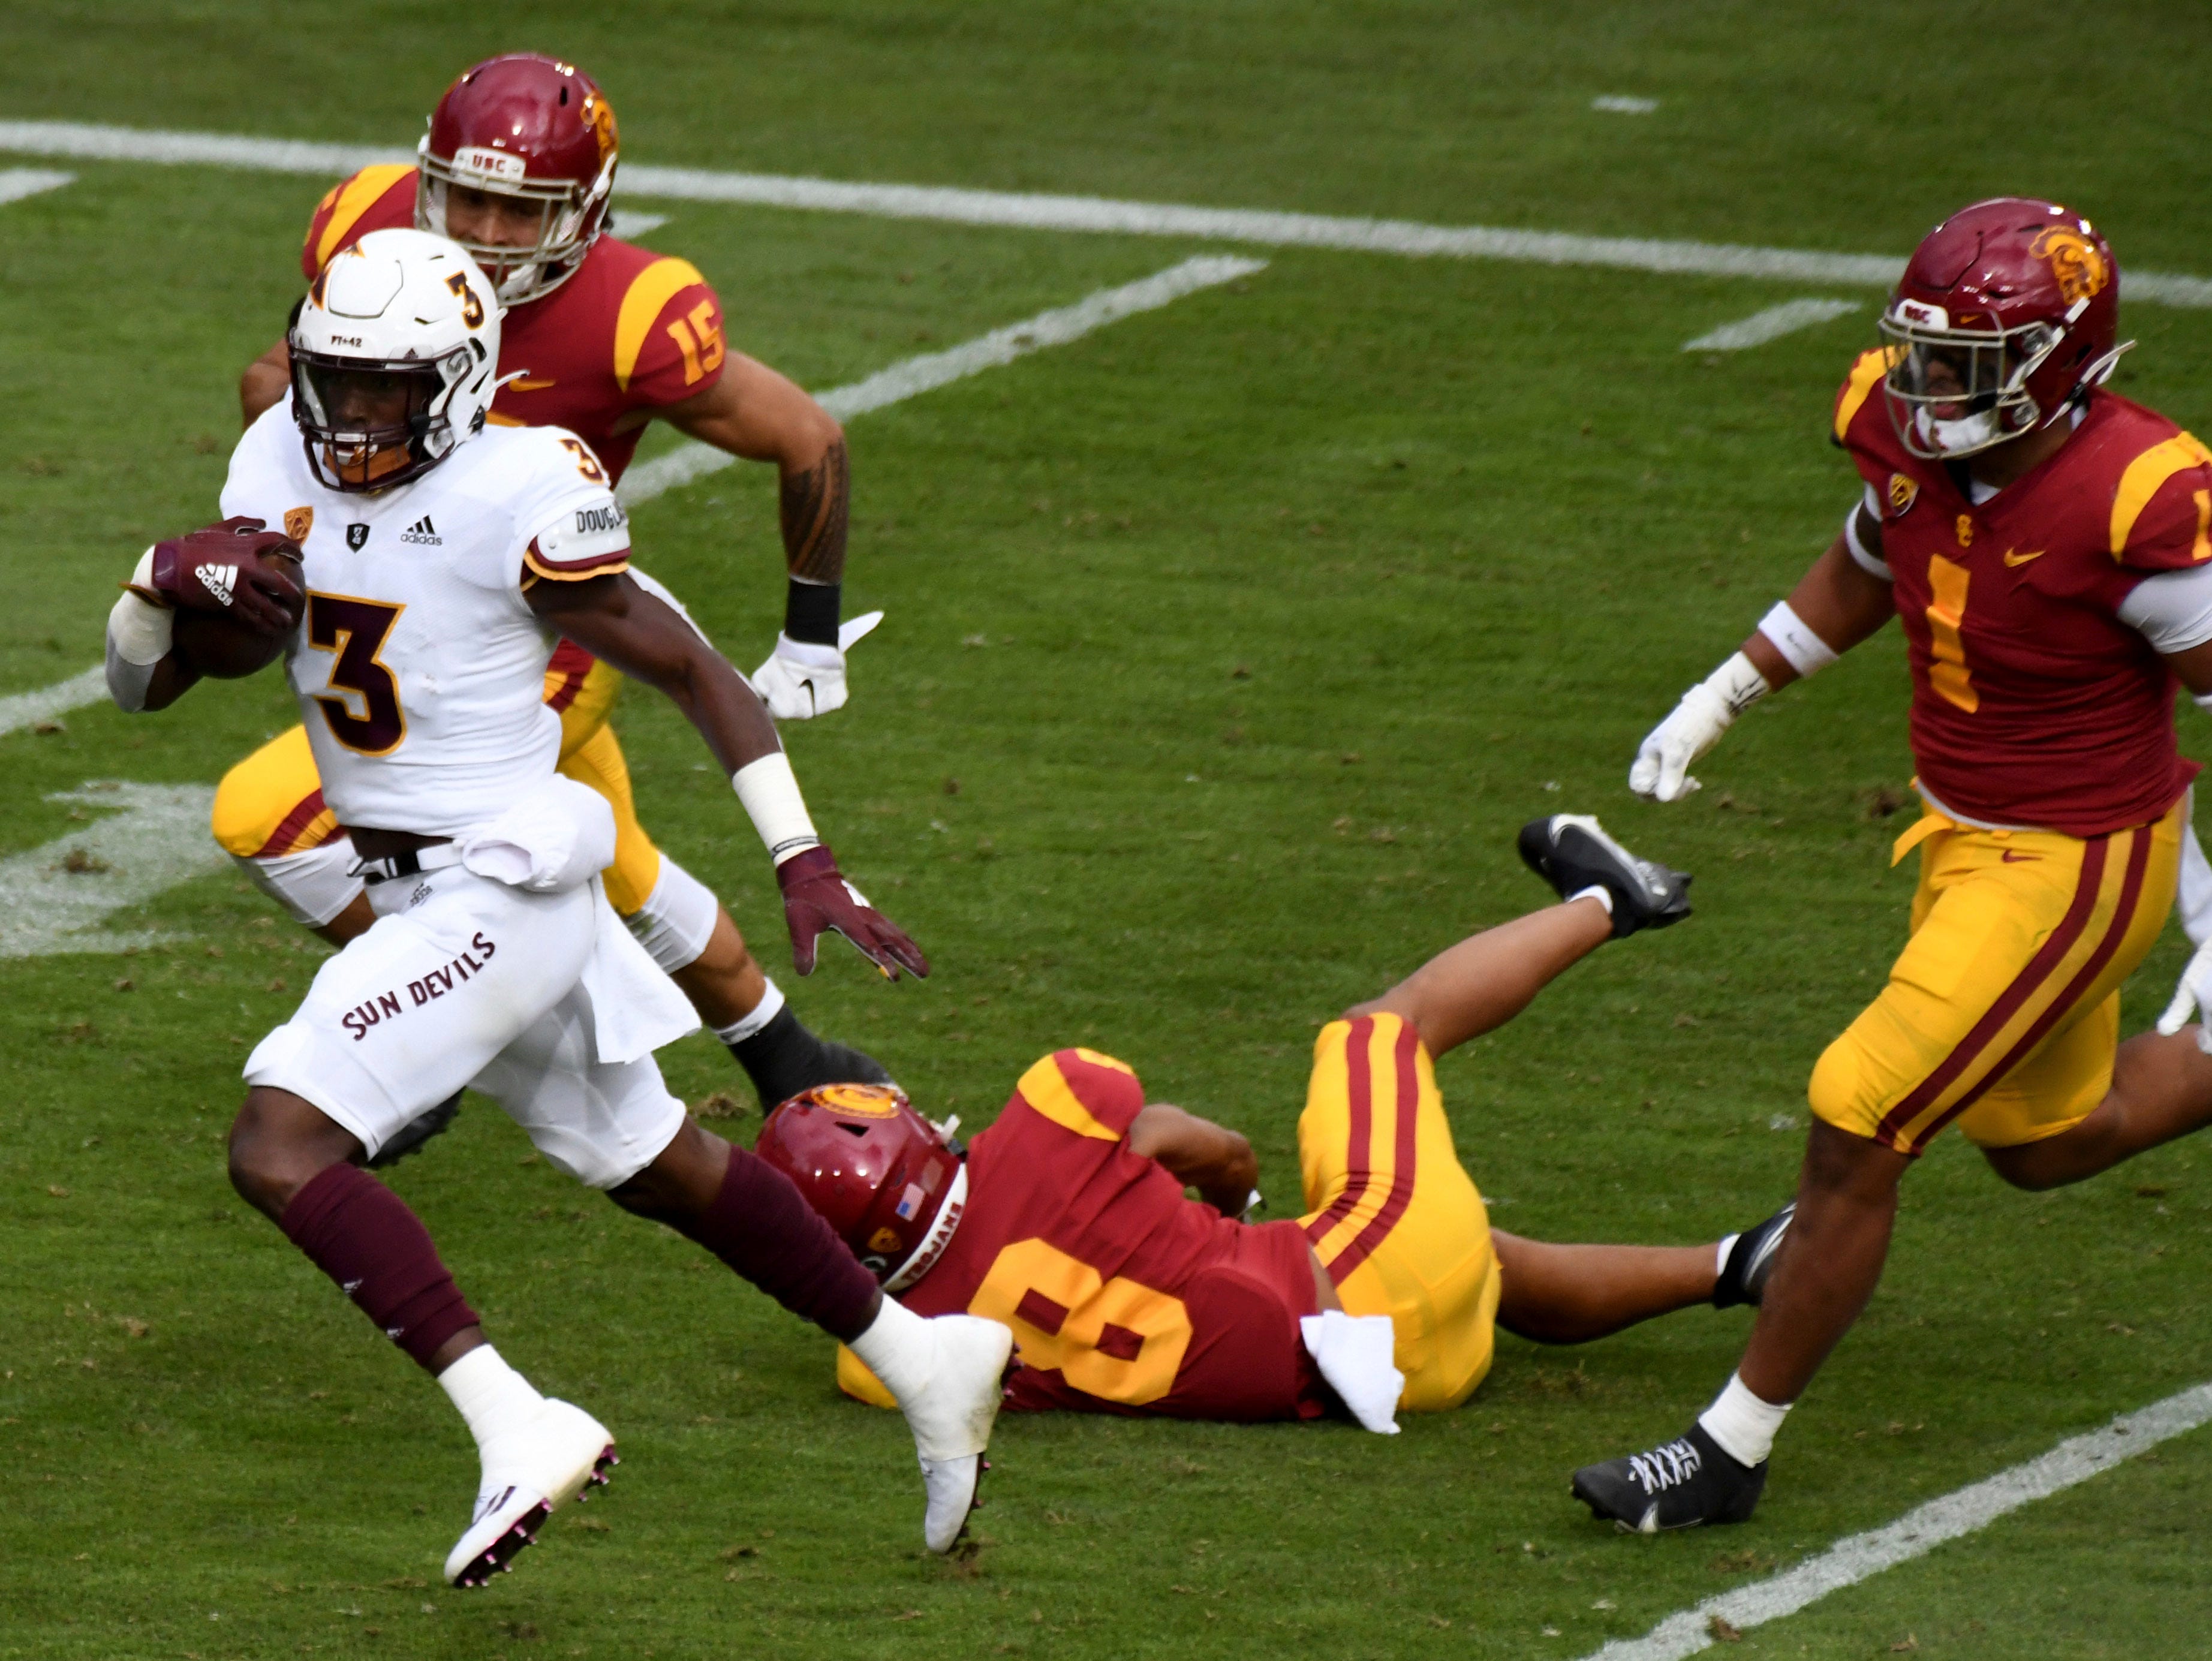 Rachaad White excels for ASU after long road to Division I football